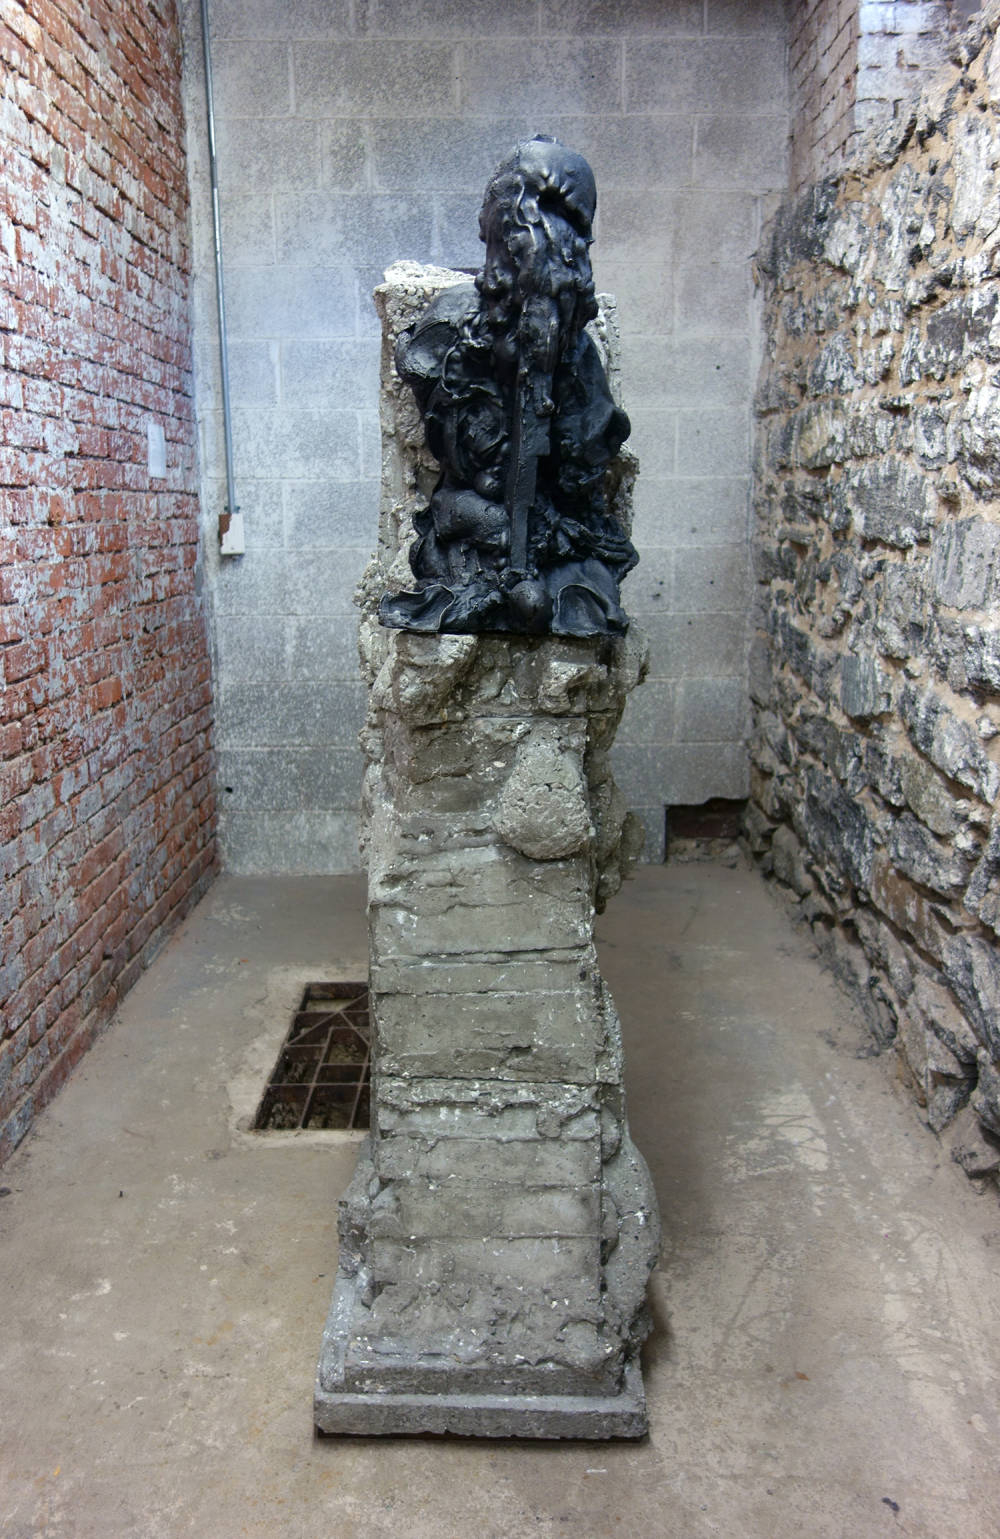 Installation view of metal and concrete sculpture, depicting a cast iron sculpture of a head and torso melting and/or decaying atop a jagged concrete plinth.